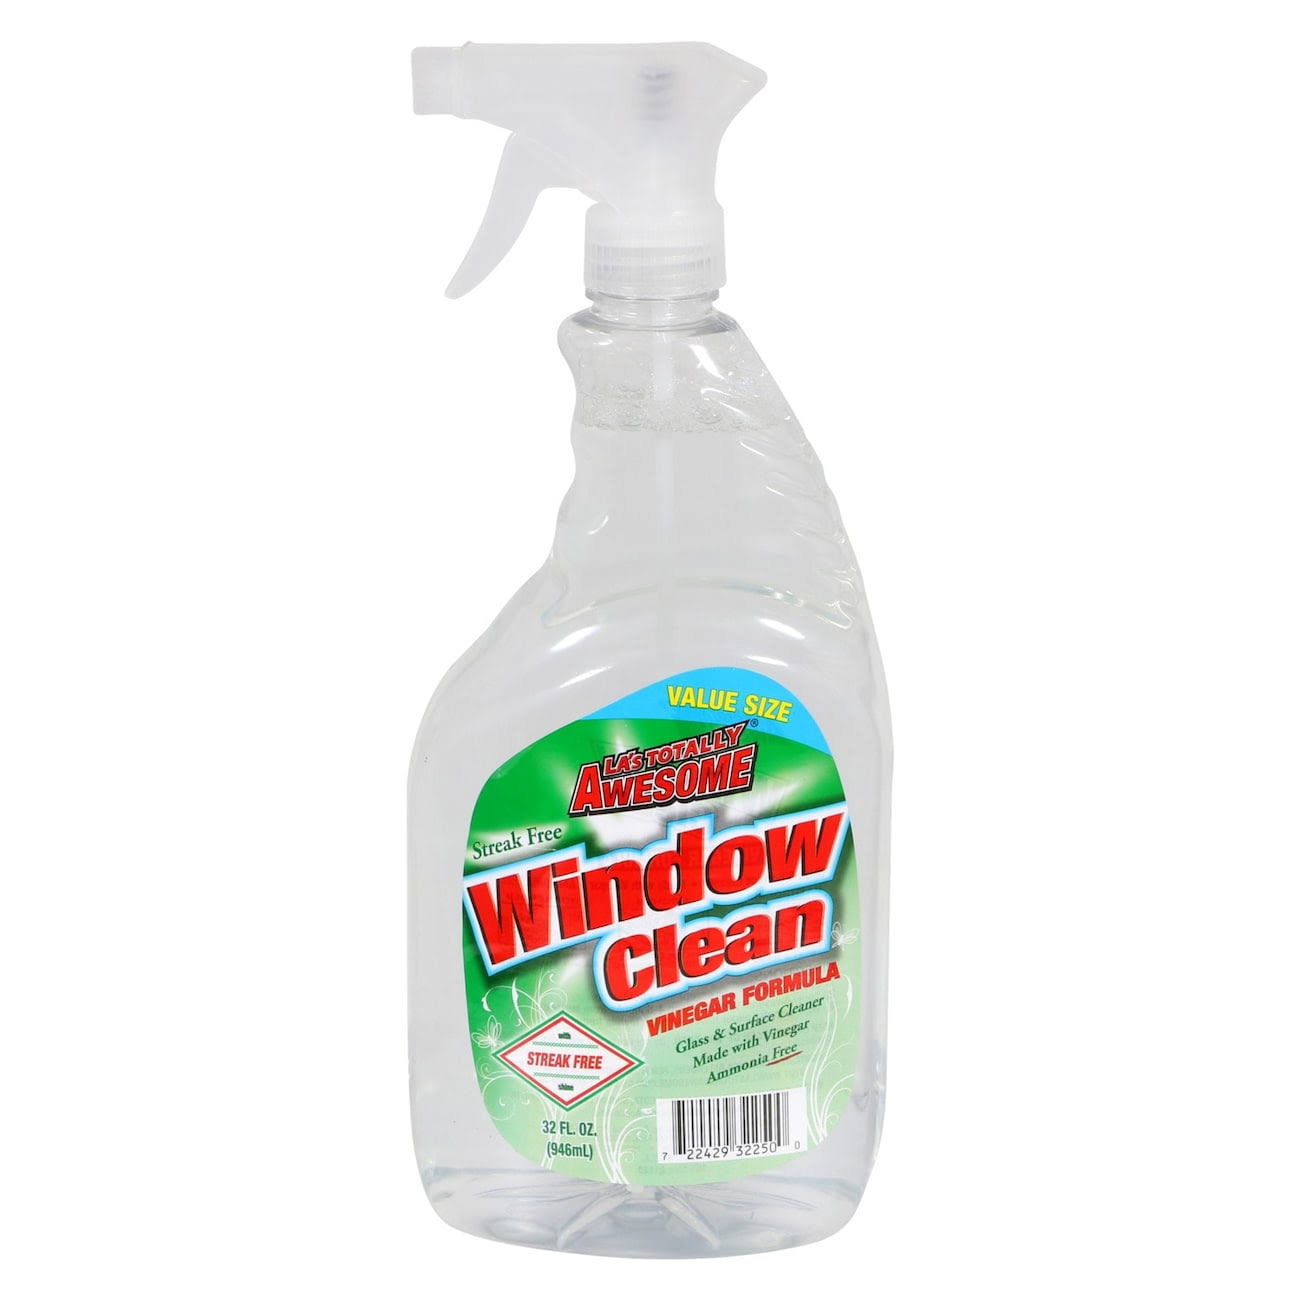 La's Totally Awesome Glass & Multi-Surface Cleaner with Vinegar, 32-oz. Bottles